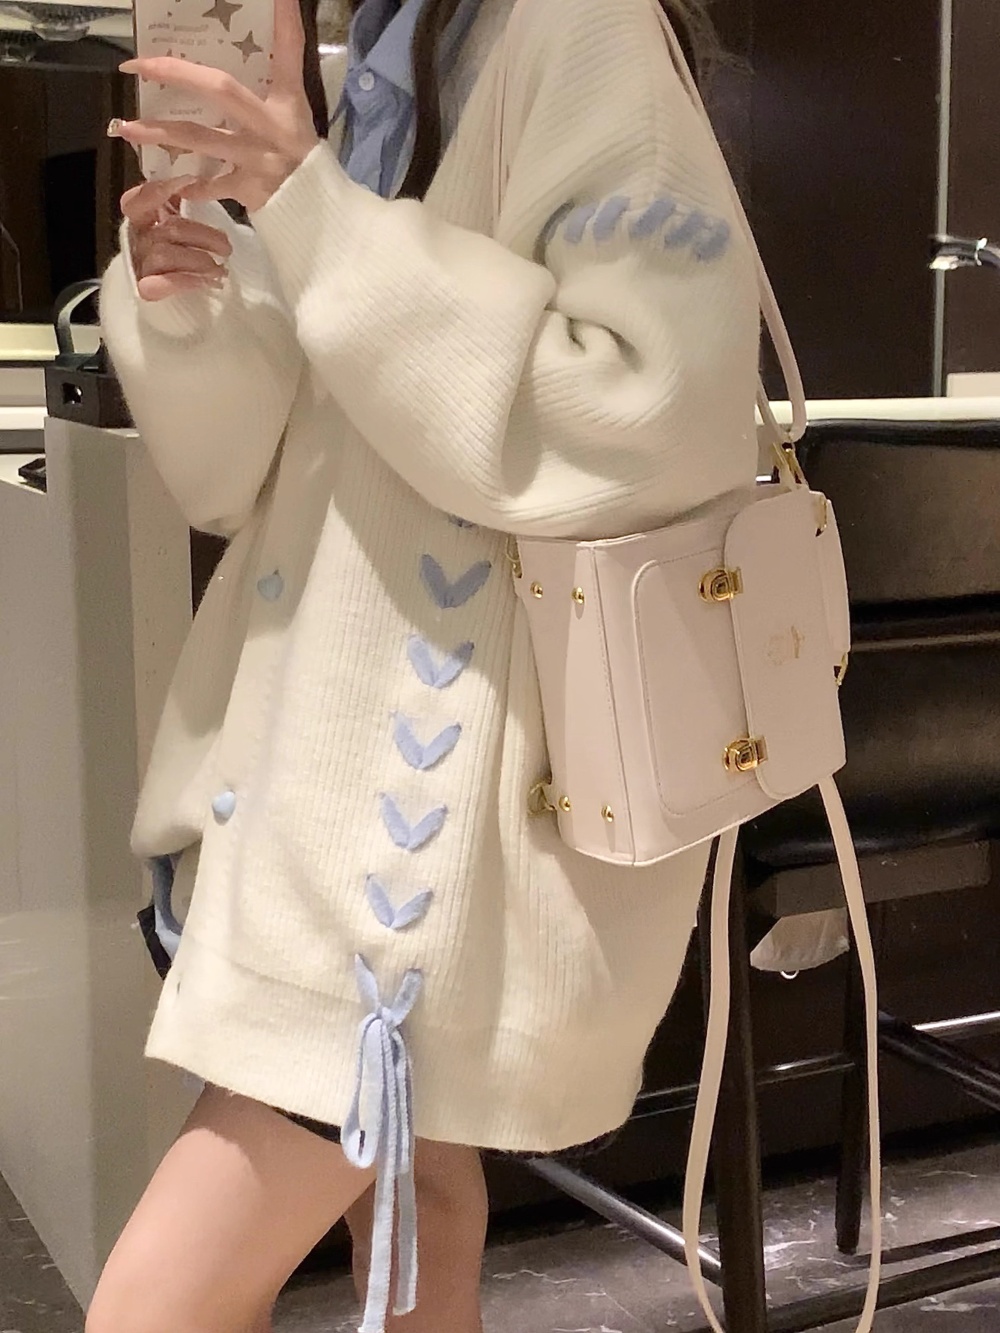 Knitted niche coat Japanese style cardigan for women